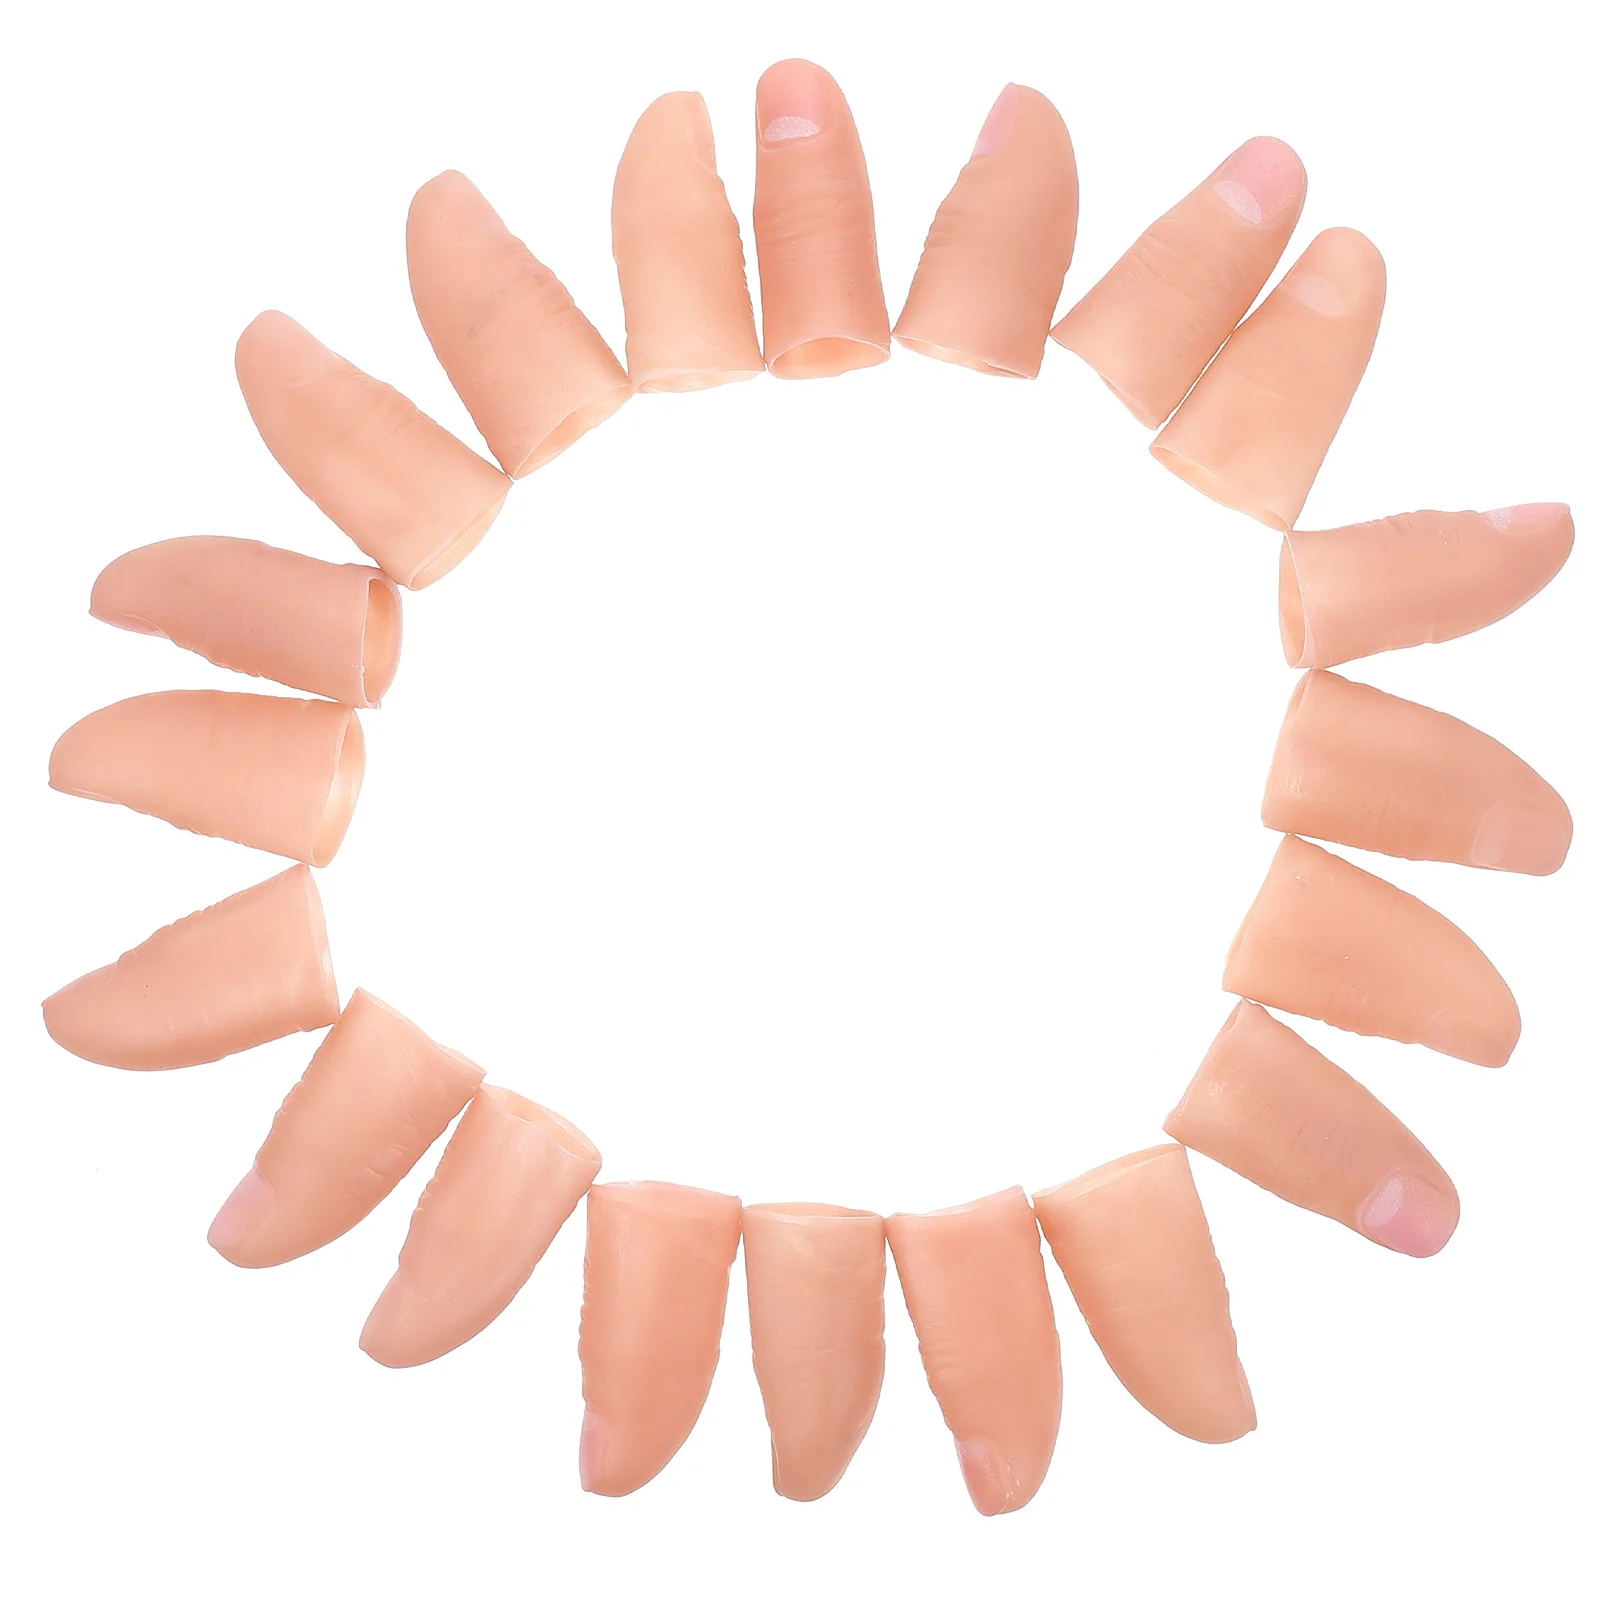 

20 Pcs Silicone Finger Sleeve Simulation Props Stage Performance Fake Interesting Thumb Multipurpose Cot Supple Cover